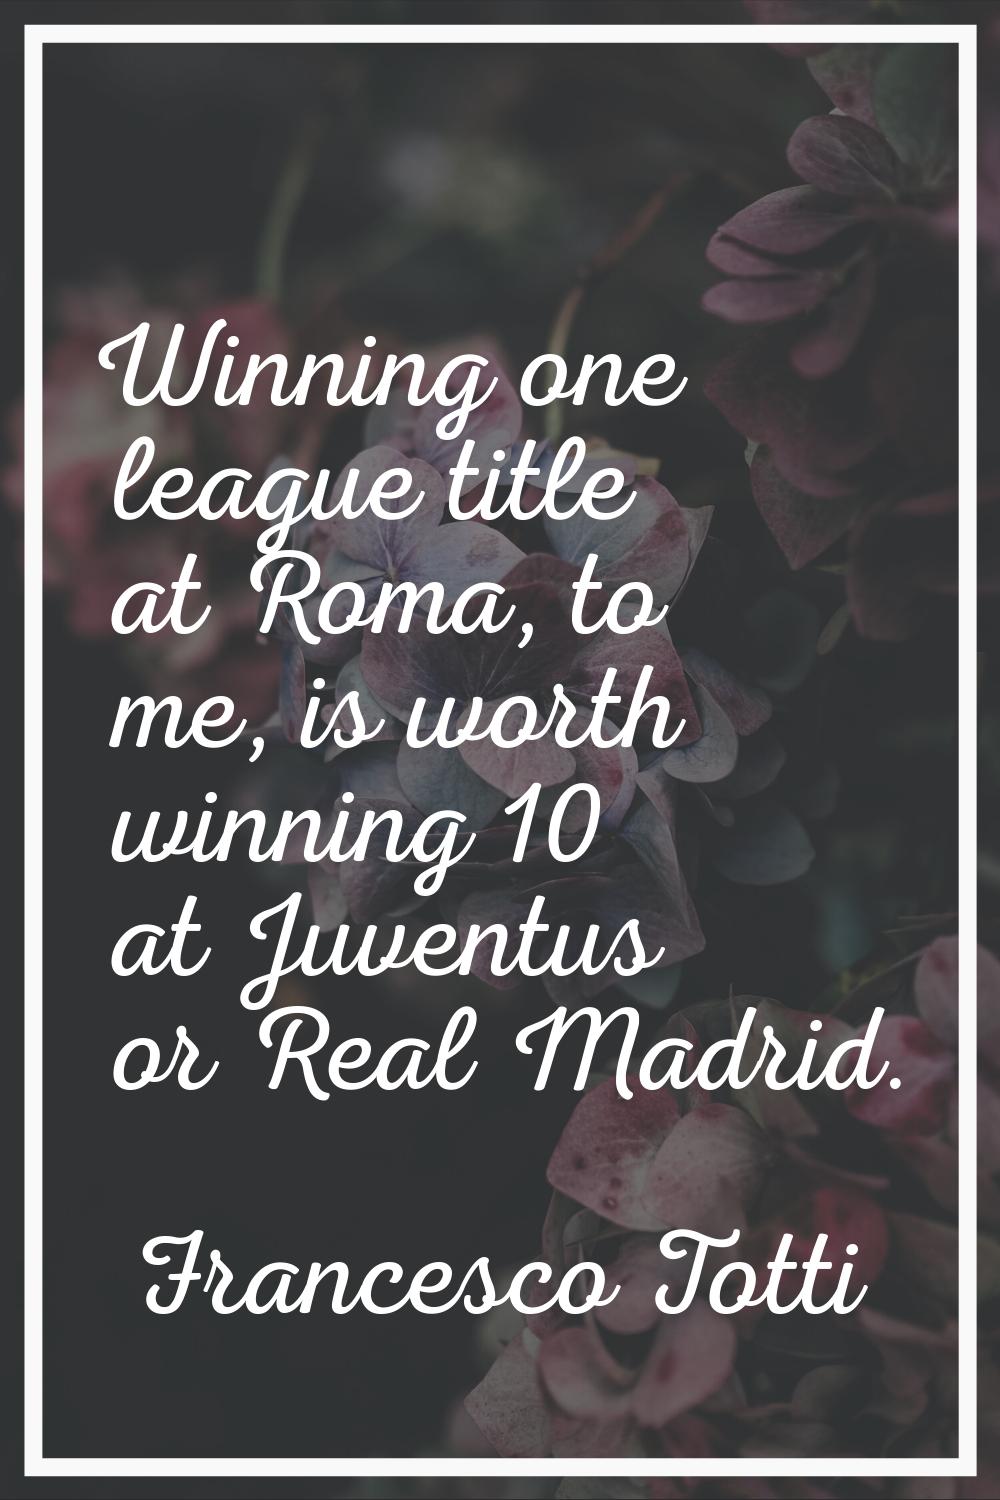 Winning one league title at Roma, to me, is worth winning 10 at Juventus or Real Madrid.